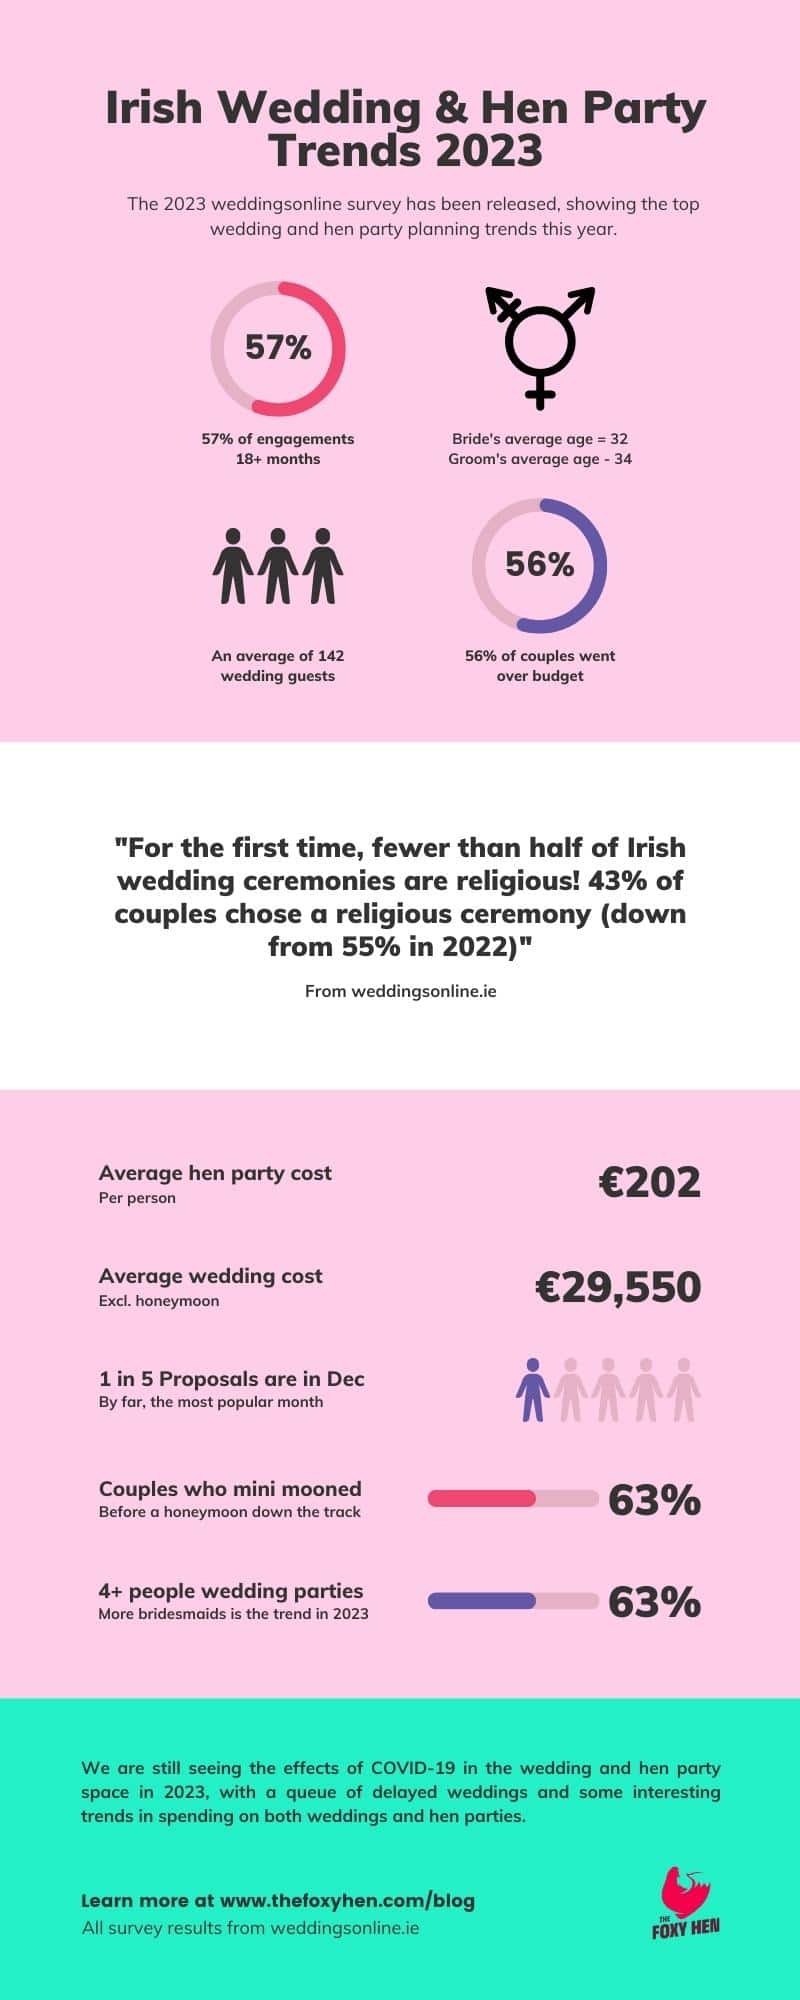 Infographic showing the most interesting statistics from the weddings online wedding survey from 2023. See text below the image to see the statistics.